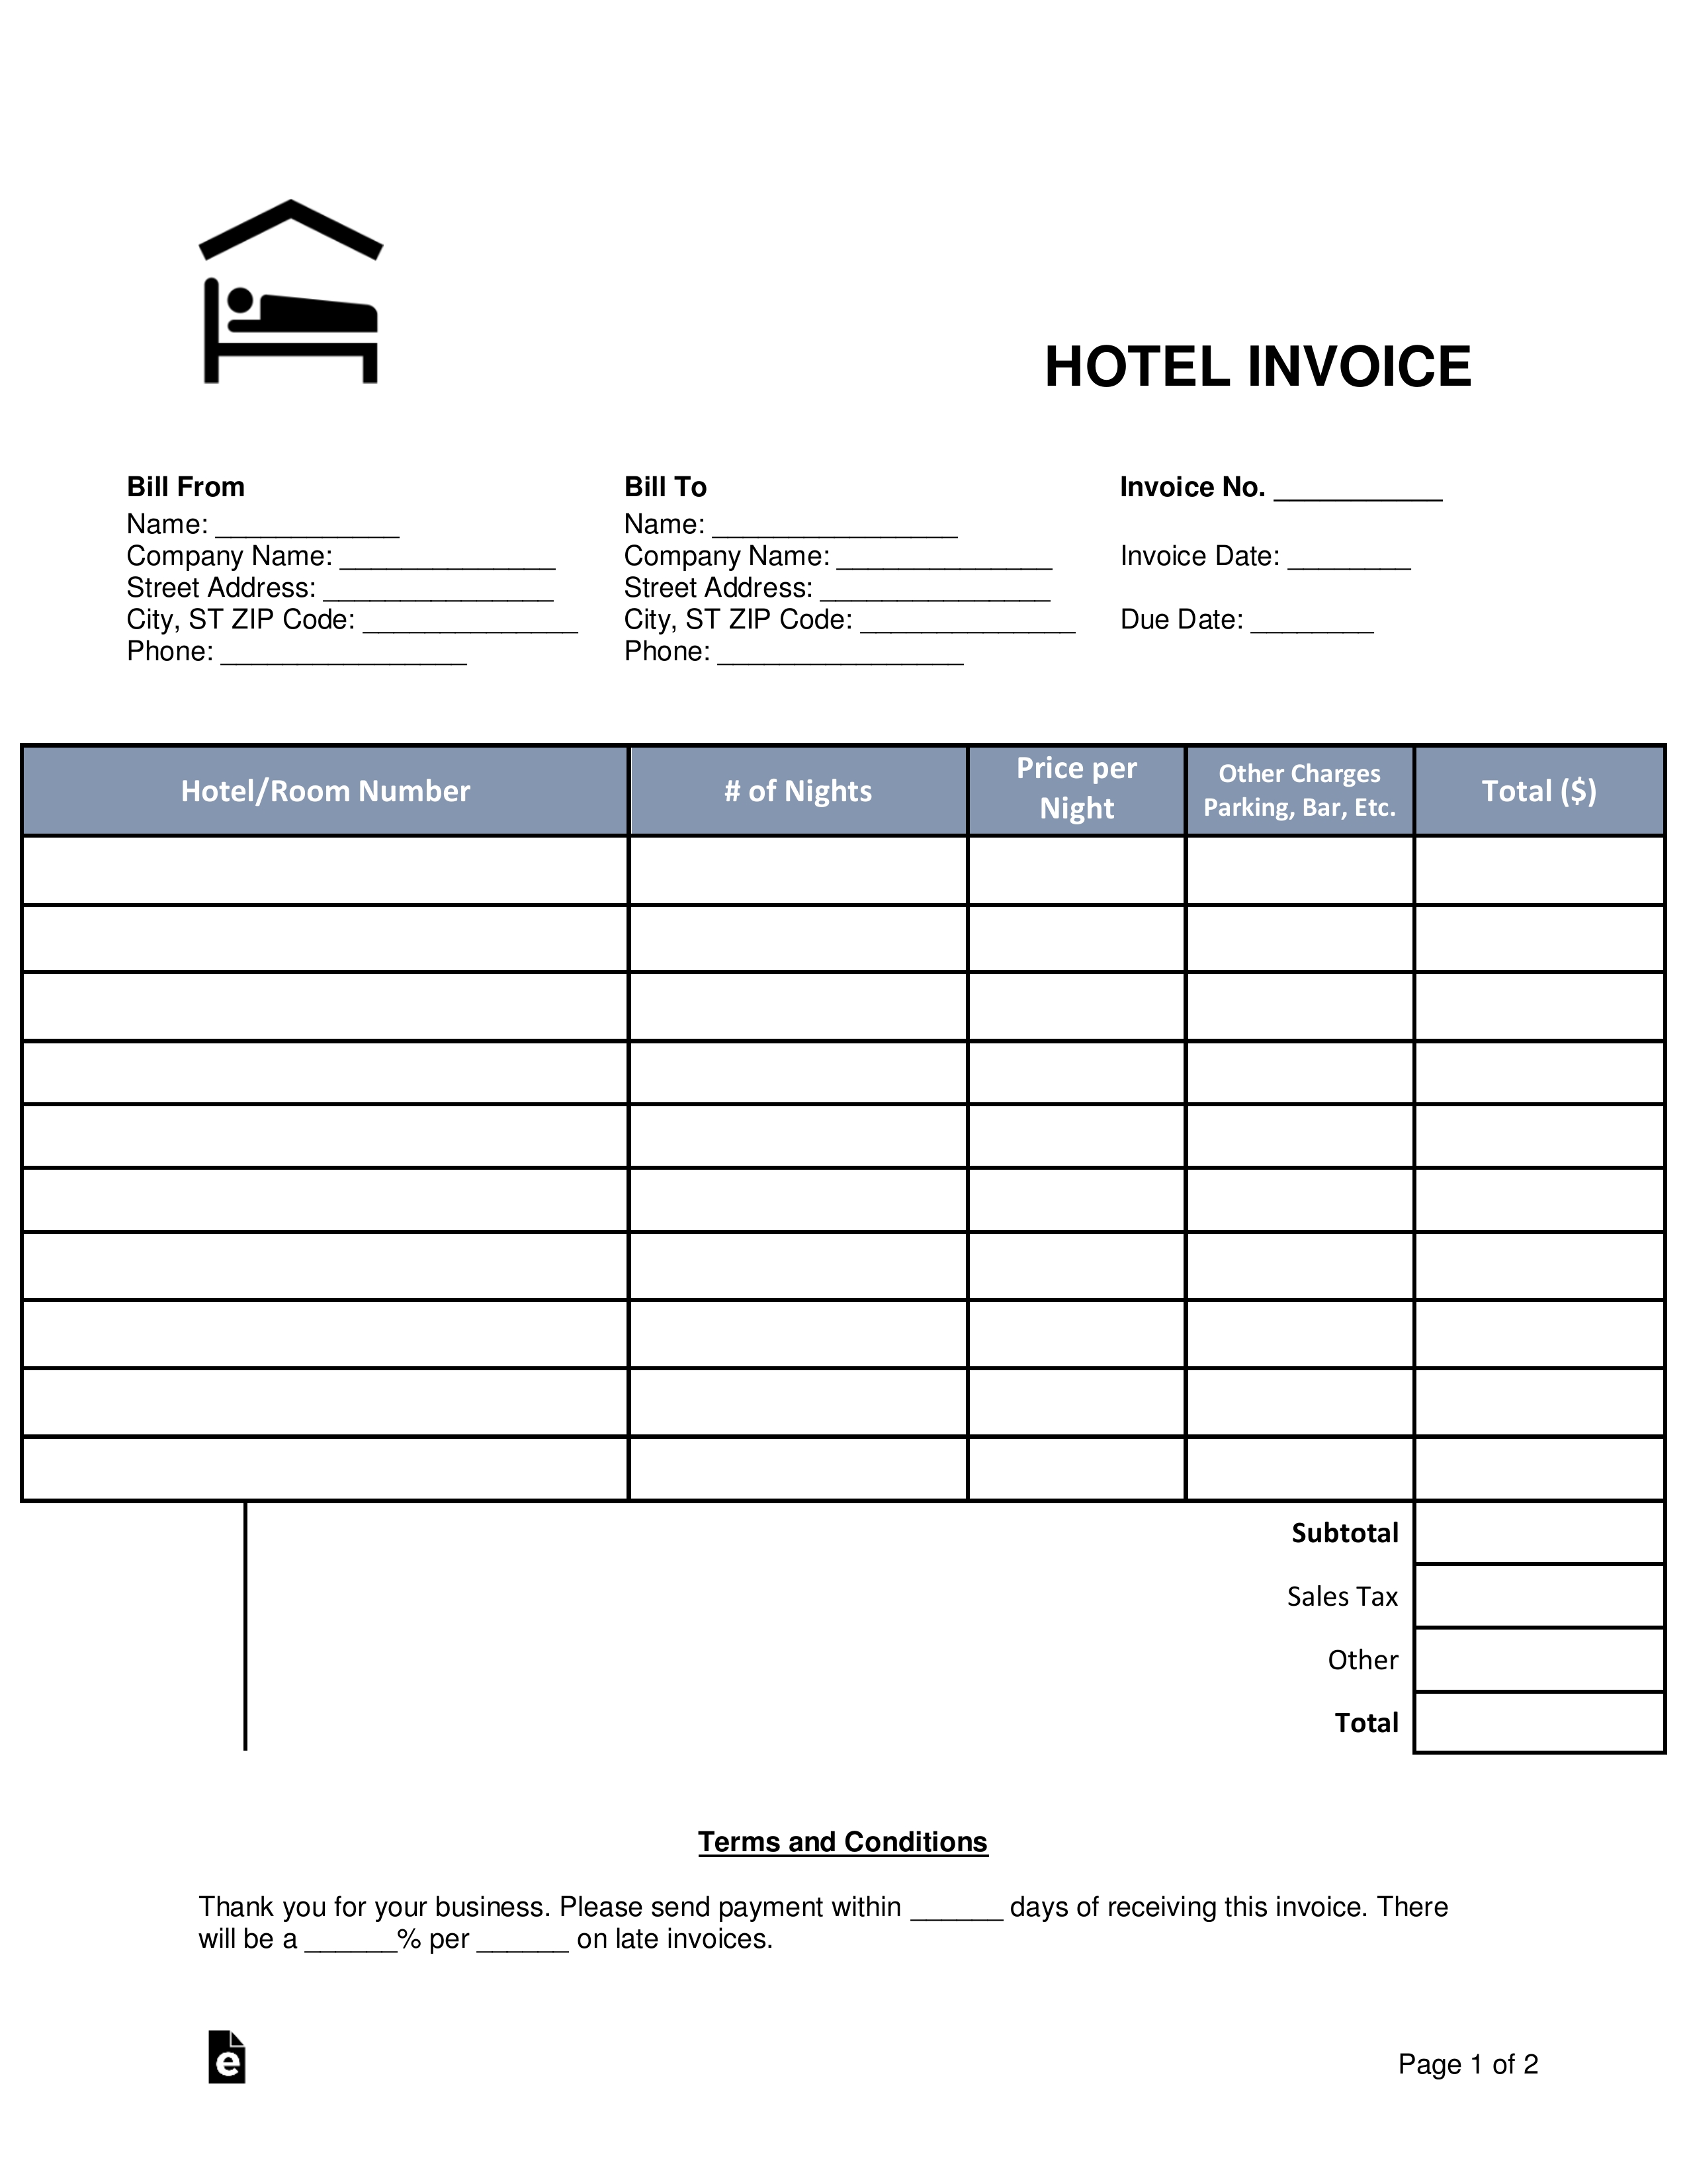 free hotel invoice receipt template word pdf eforms hotel invoice templates printable free